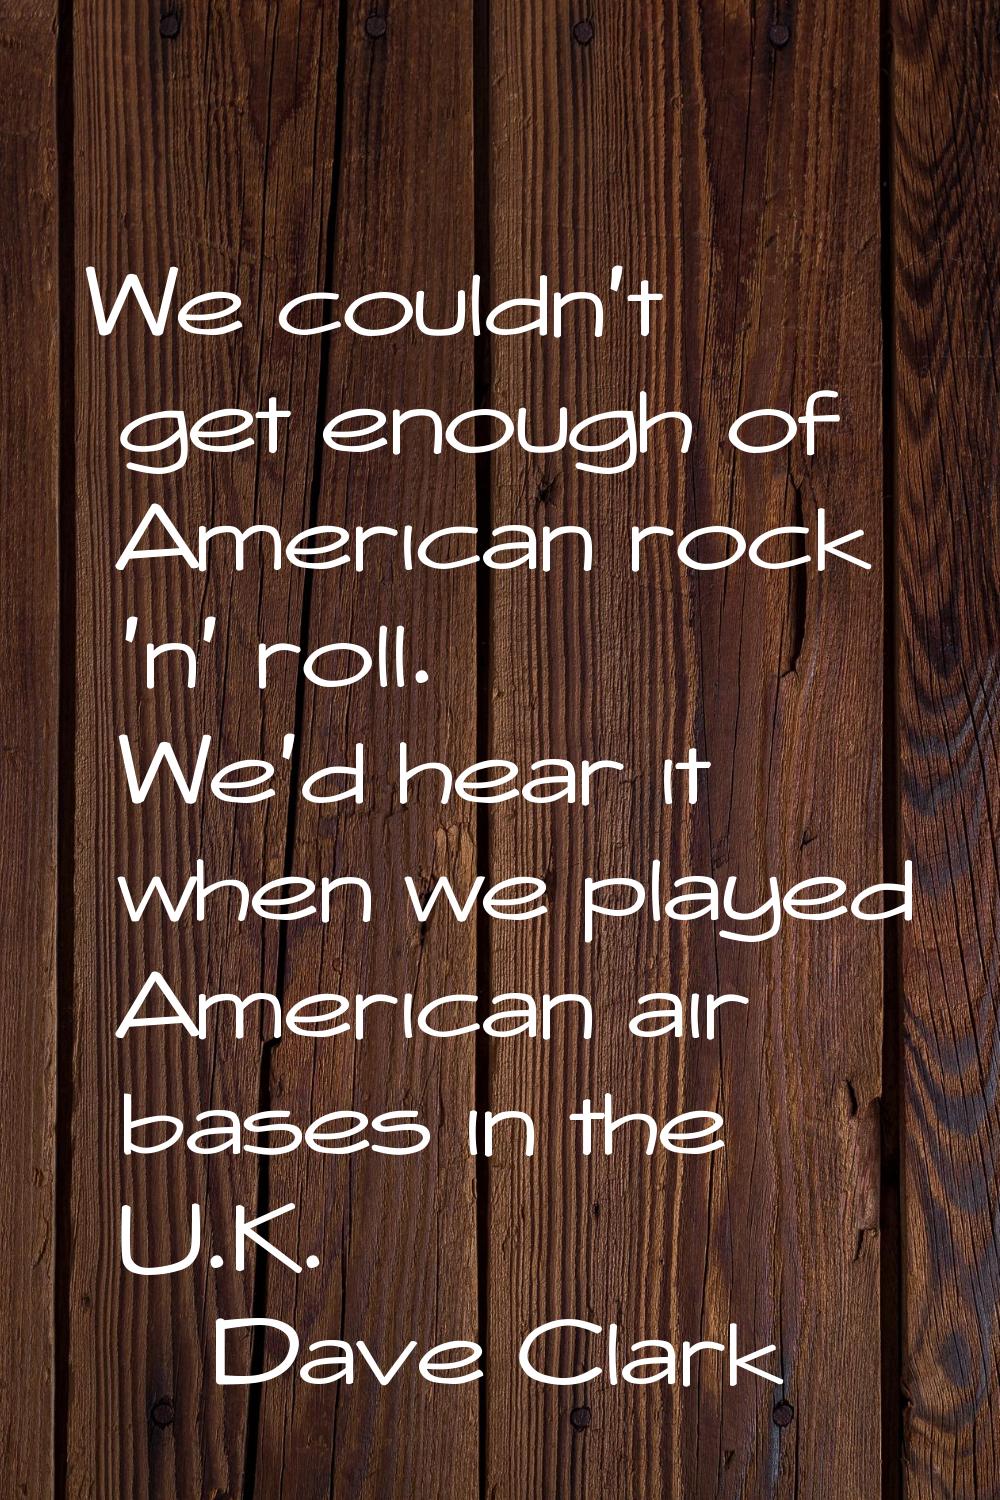 We couldn't get enough of American rock 'n' roll. We'd hear it when we played American air bases in